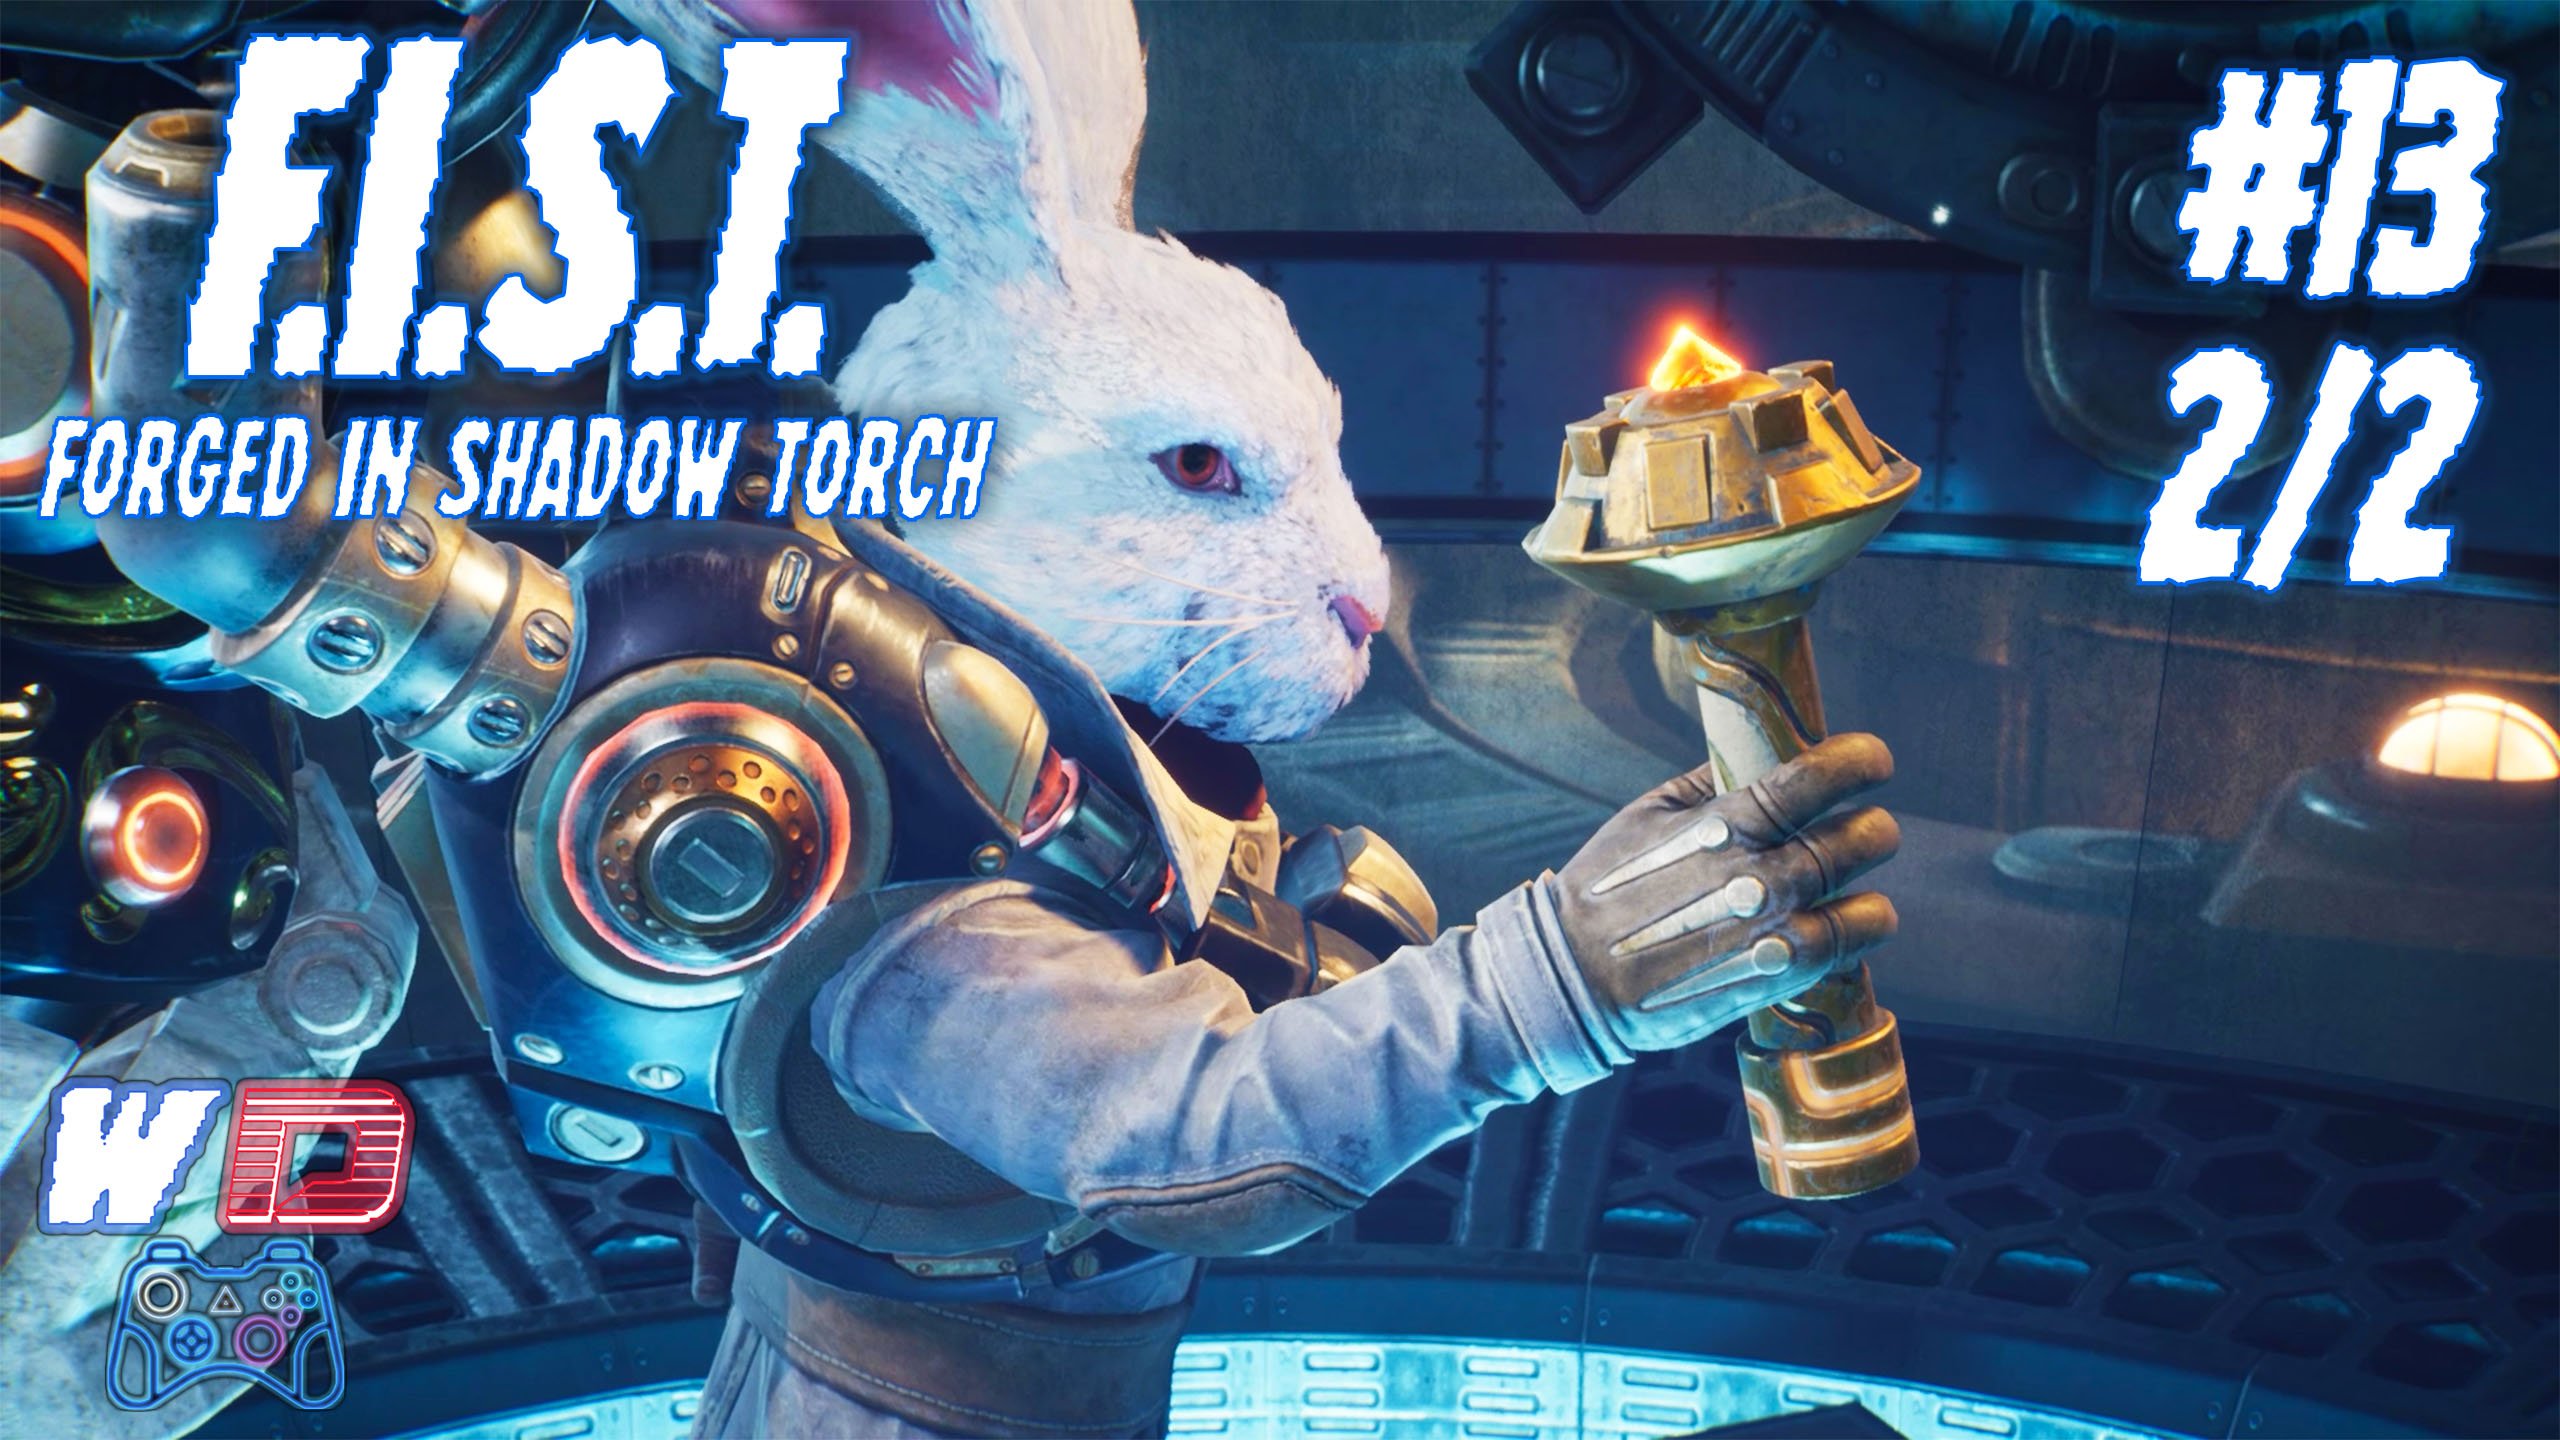 F.I.S.T. Forged In Shadow Torch. Прохождение #13 (2/2). Ключ Искры